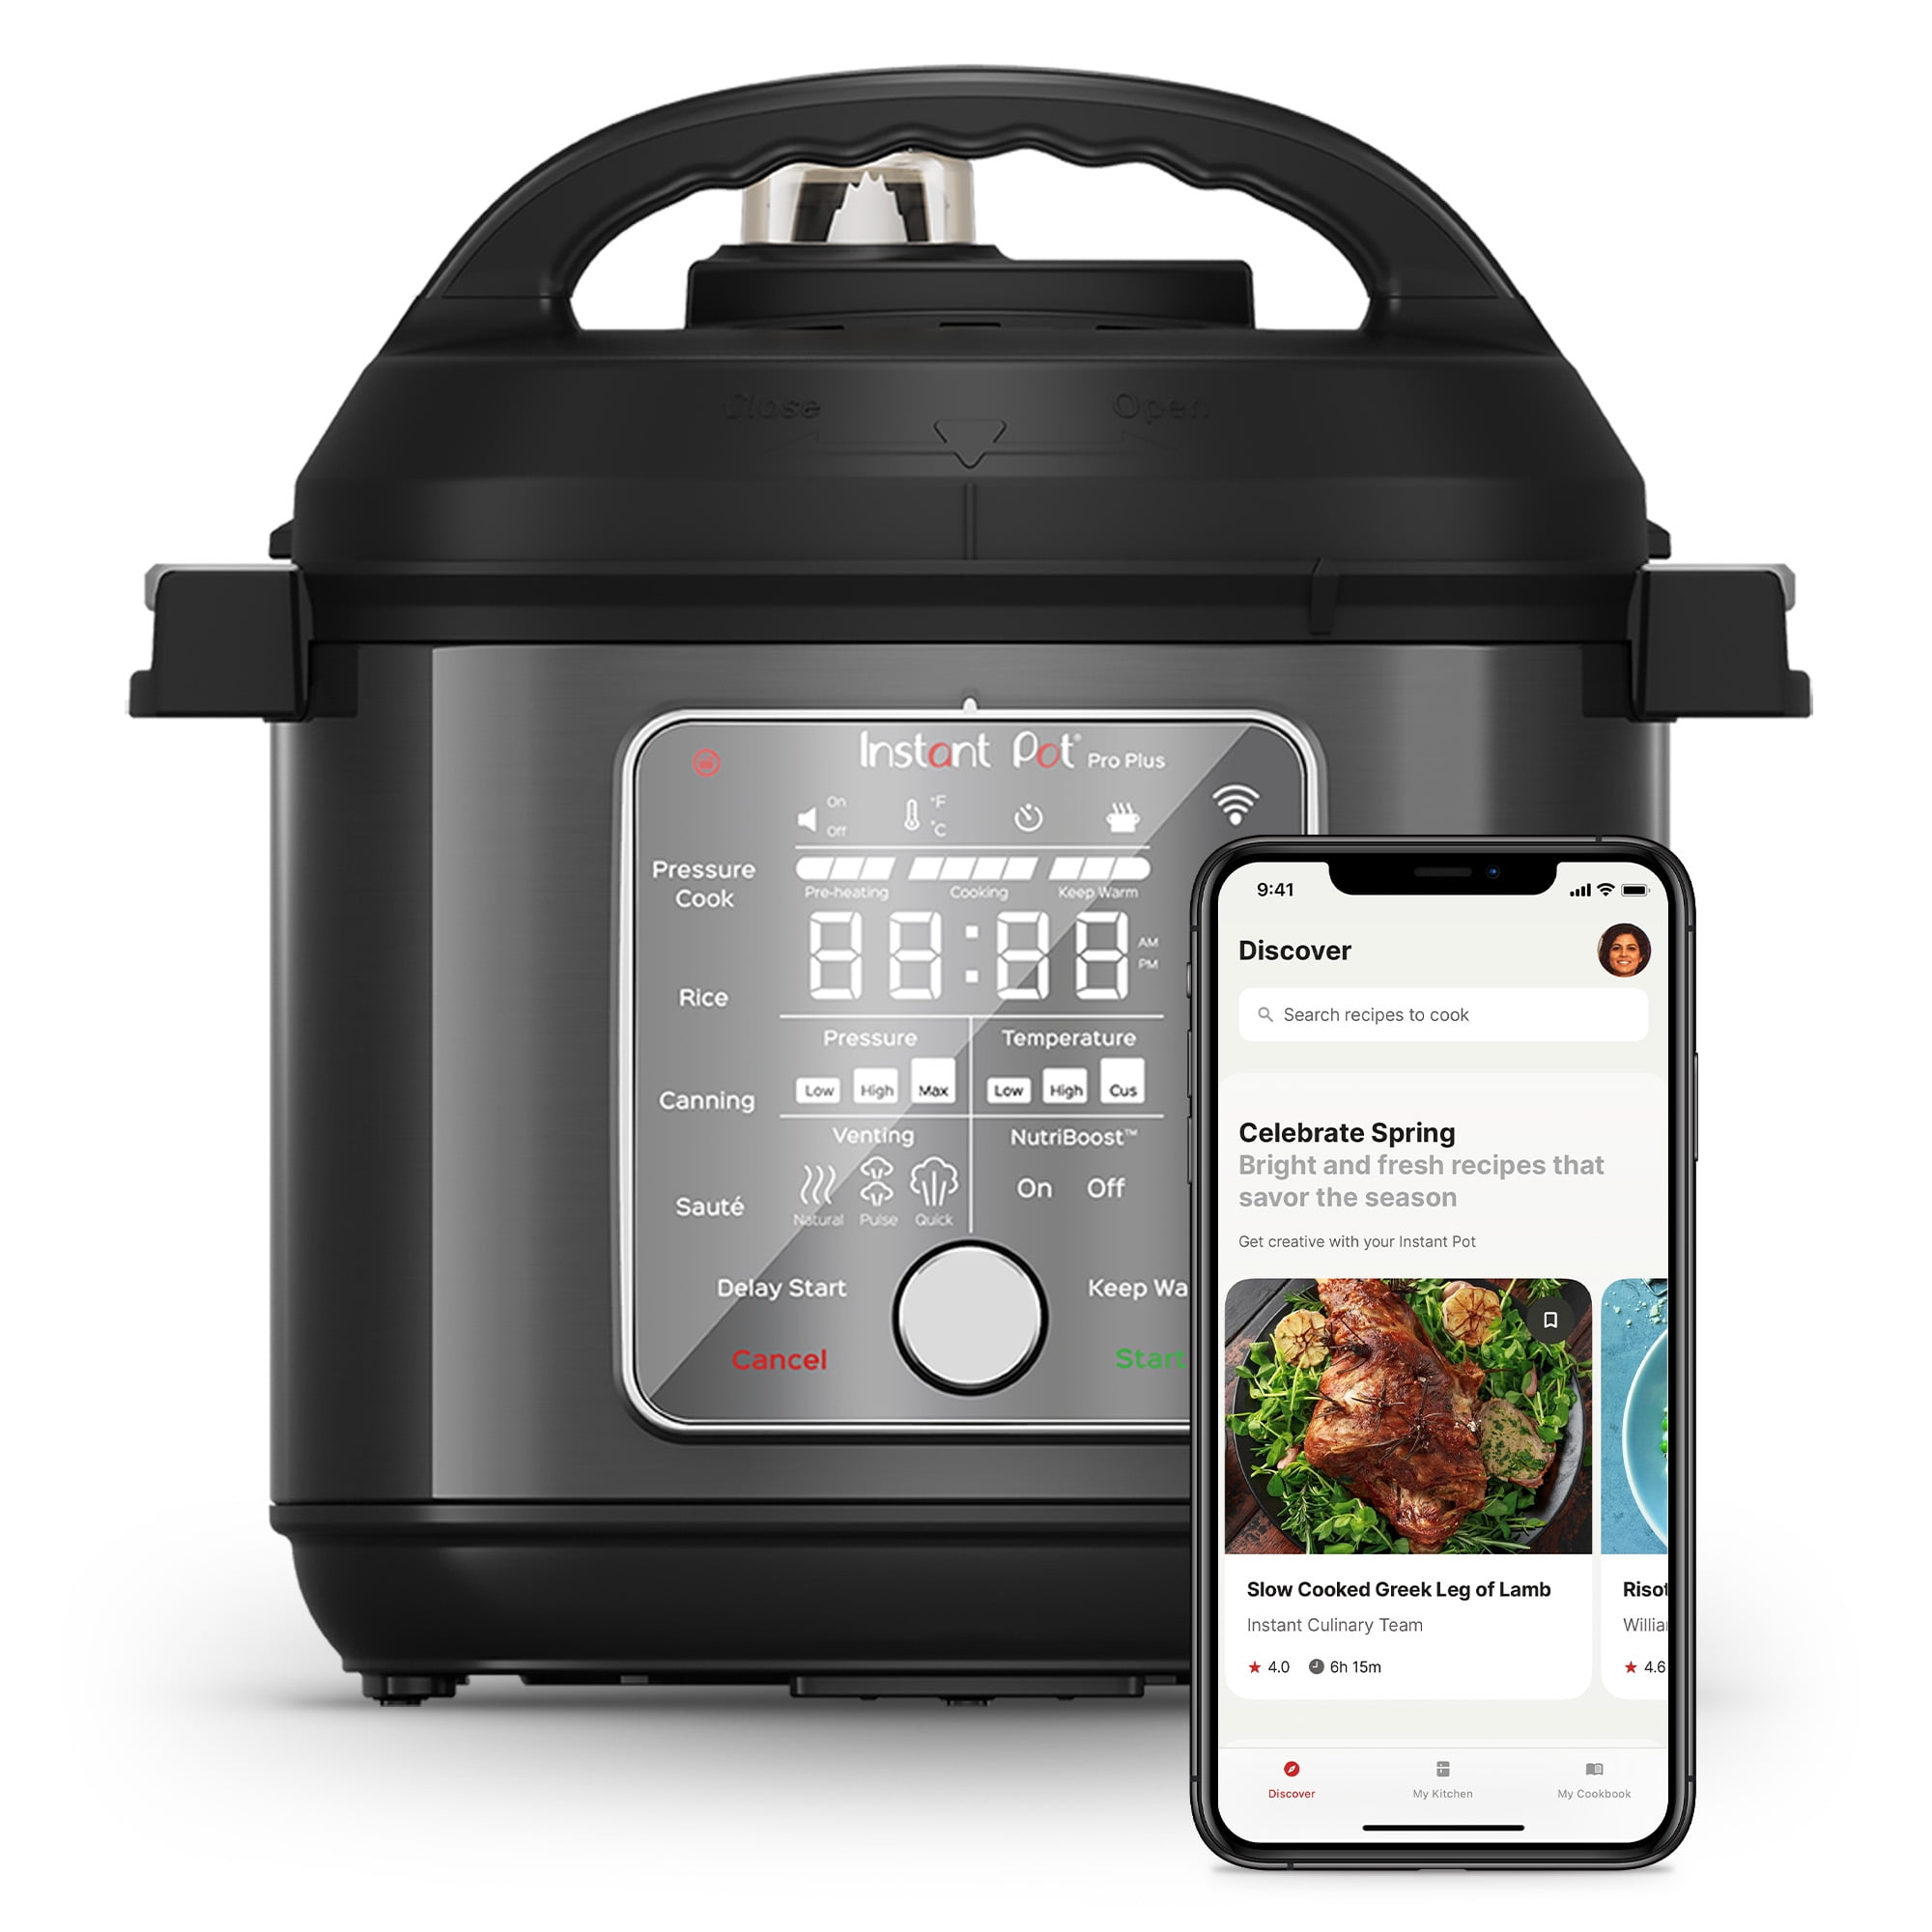 Instant Pot Programmable Pressure Cooker - Product Review